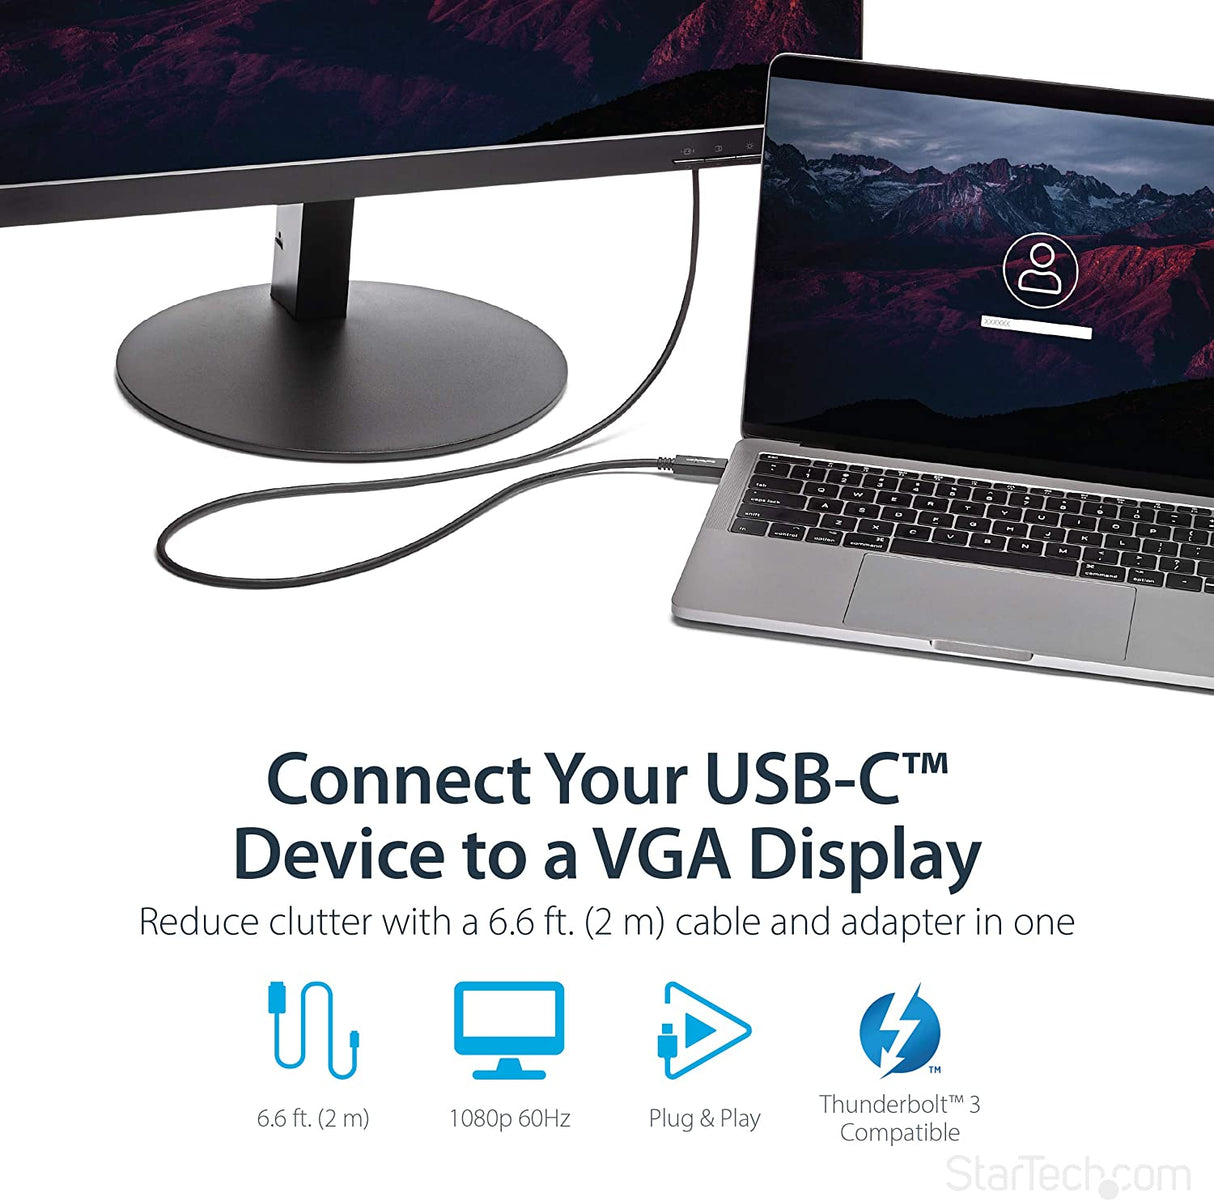 StarTech.com 6ft/2m USB C to VGA Cable - 1920x1200/1080p USB Type C to VGA Video Active Adapter Cable - Thunderbolt 3 Compatible - Laptop to VGA Monitor/Projector - DP Alt Mode HBR2 (CDP2VGAMM2MB) 6.6 feet